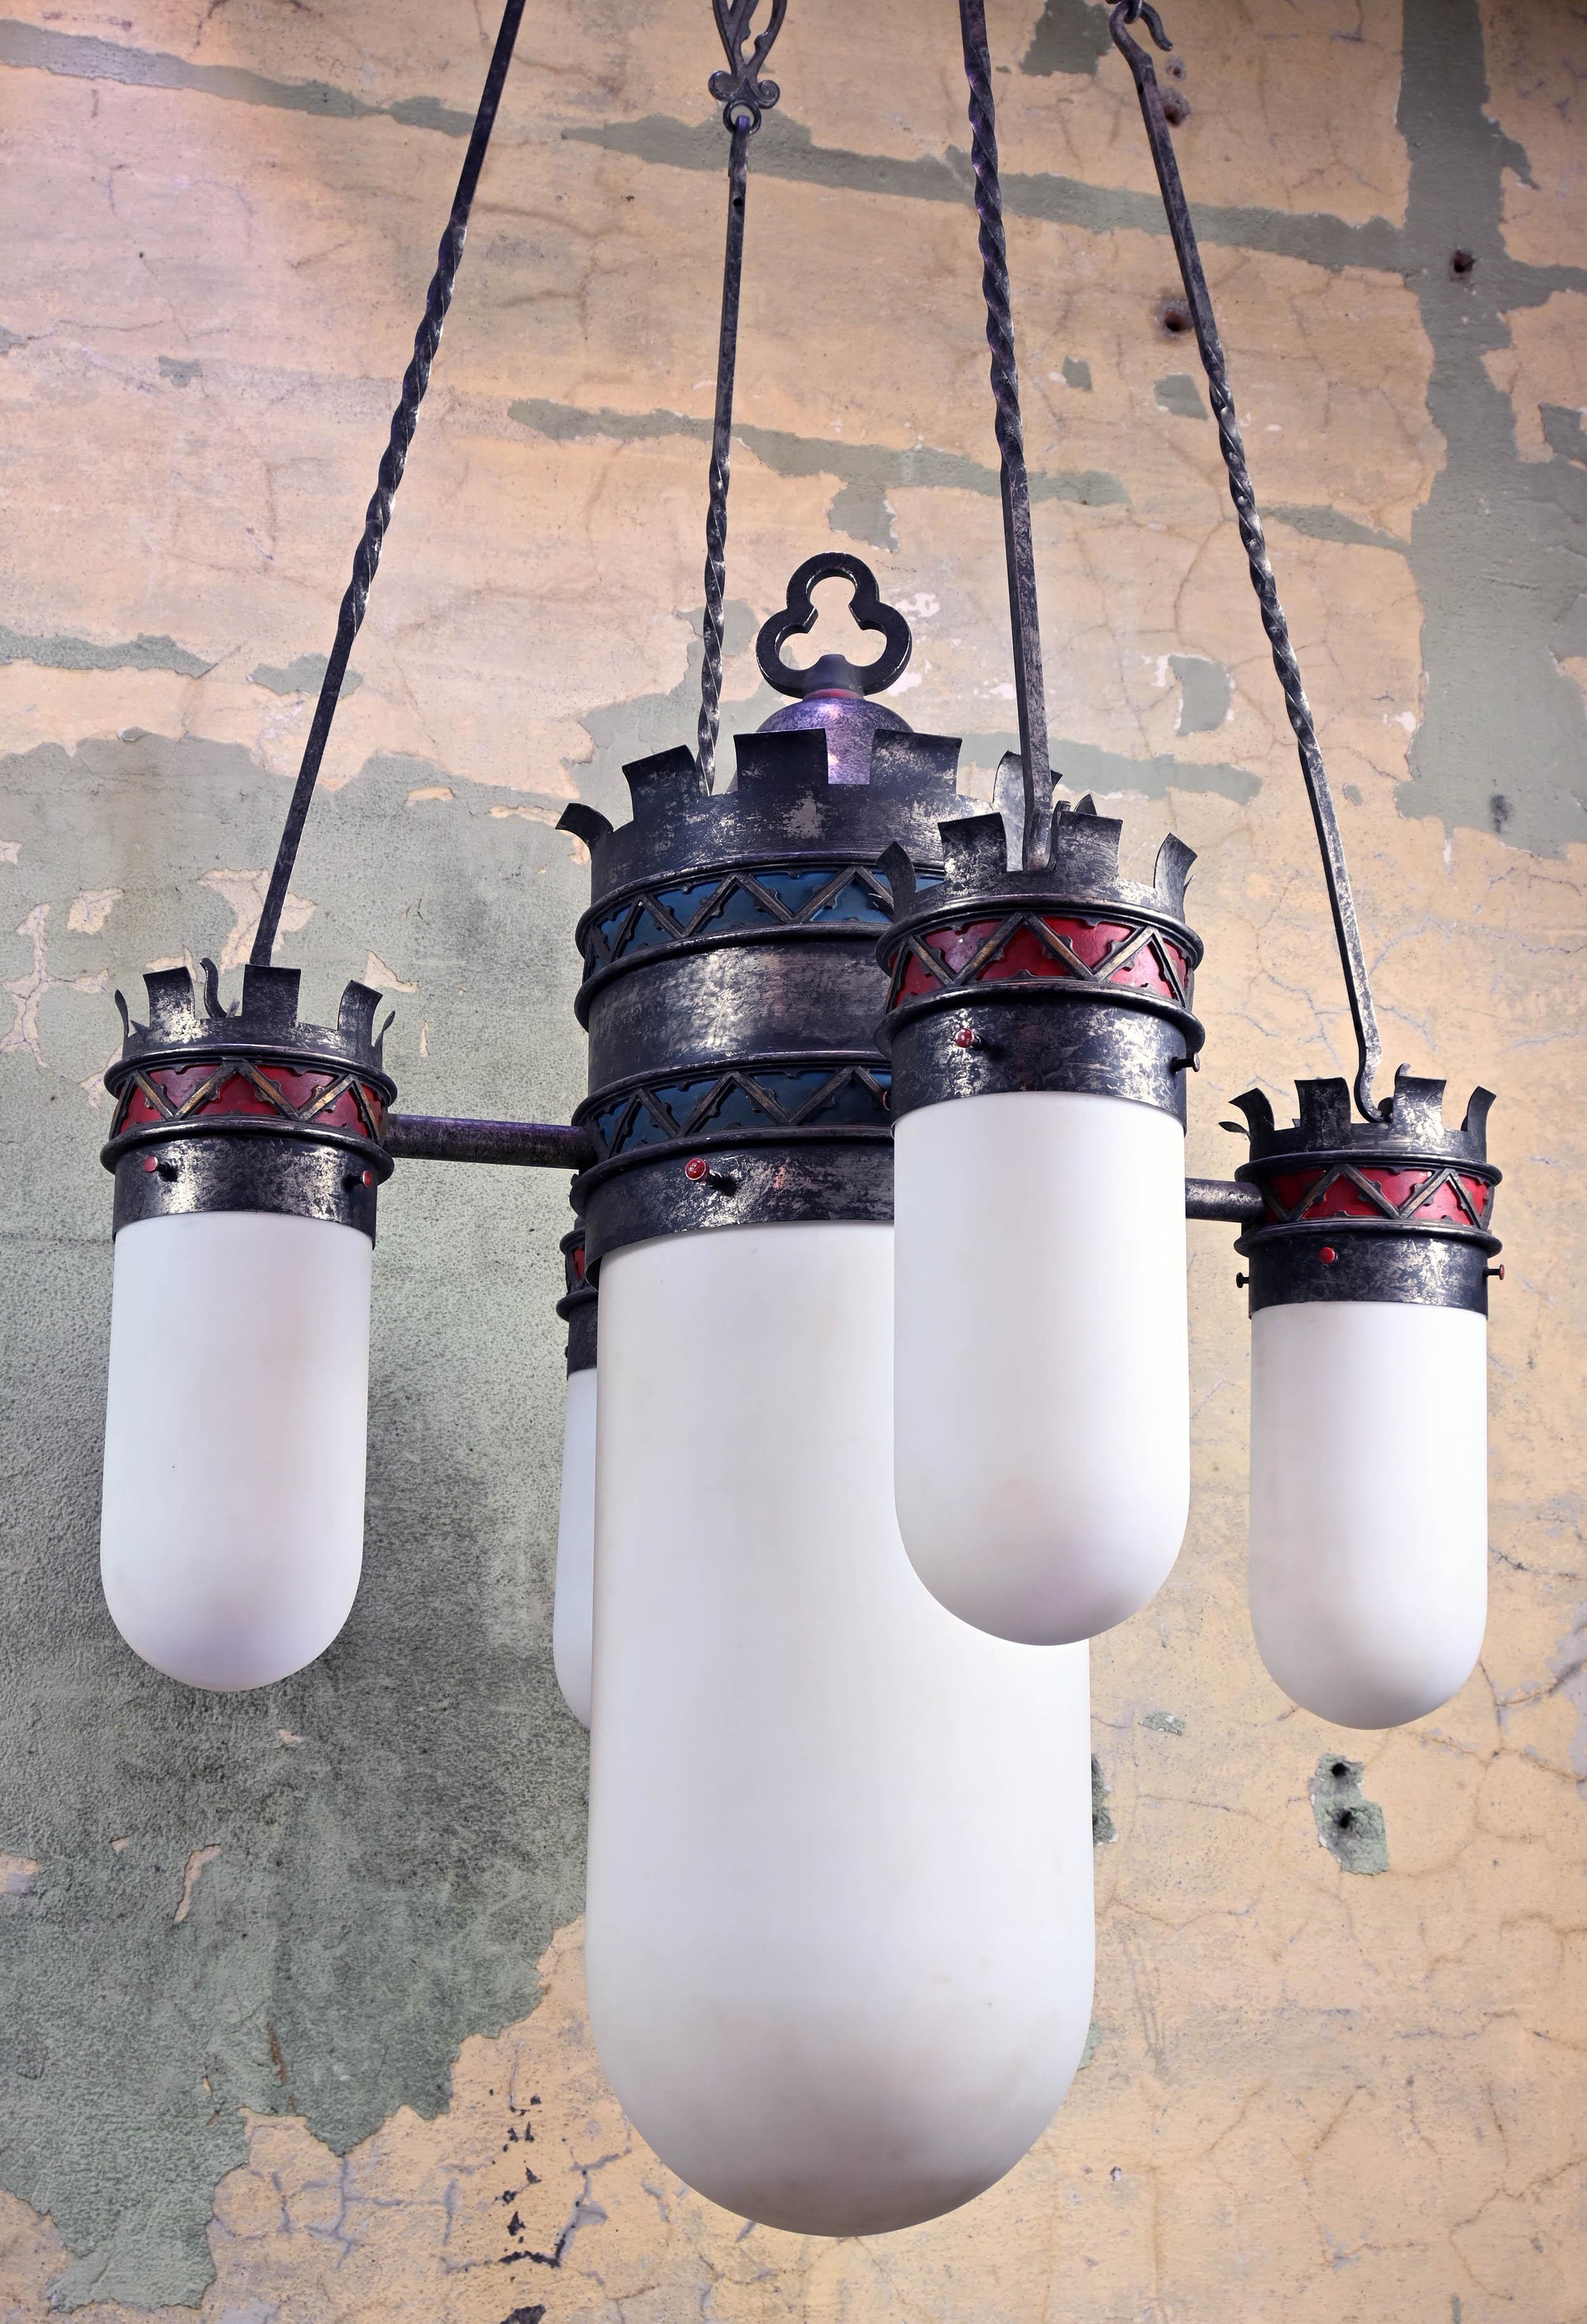 Bullet shades: Four small 6” diameter by 9” tall / one large 12” diameter by 19” tall to first canopy 27” tall, then as much chain as you could want 109” total available to 10” ceiling canopy

Illumination: 5 standard Edison socket 
Overall